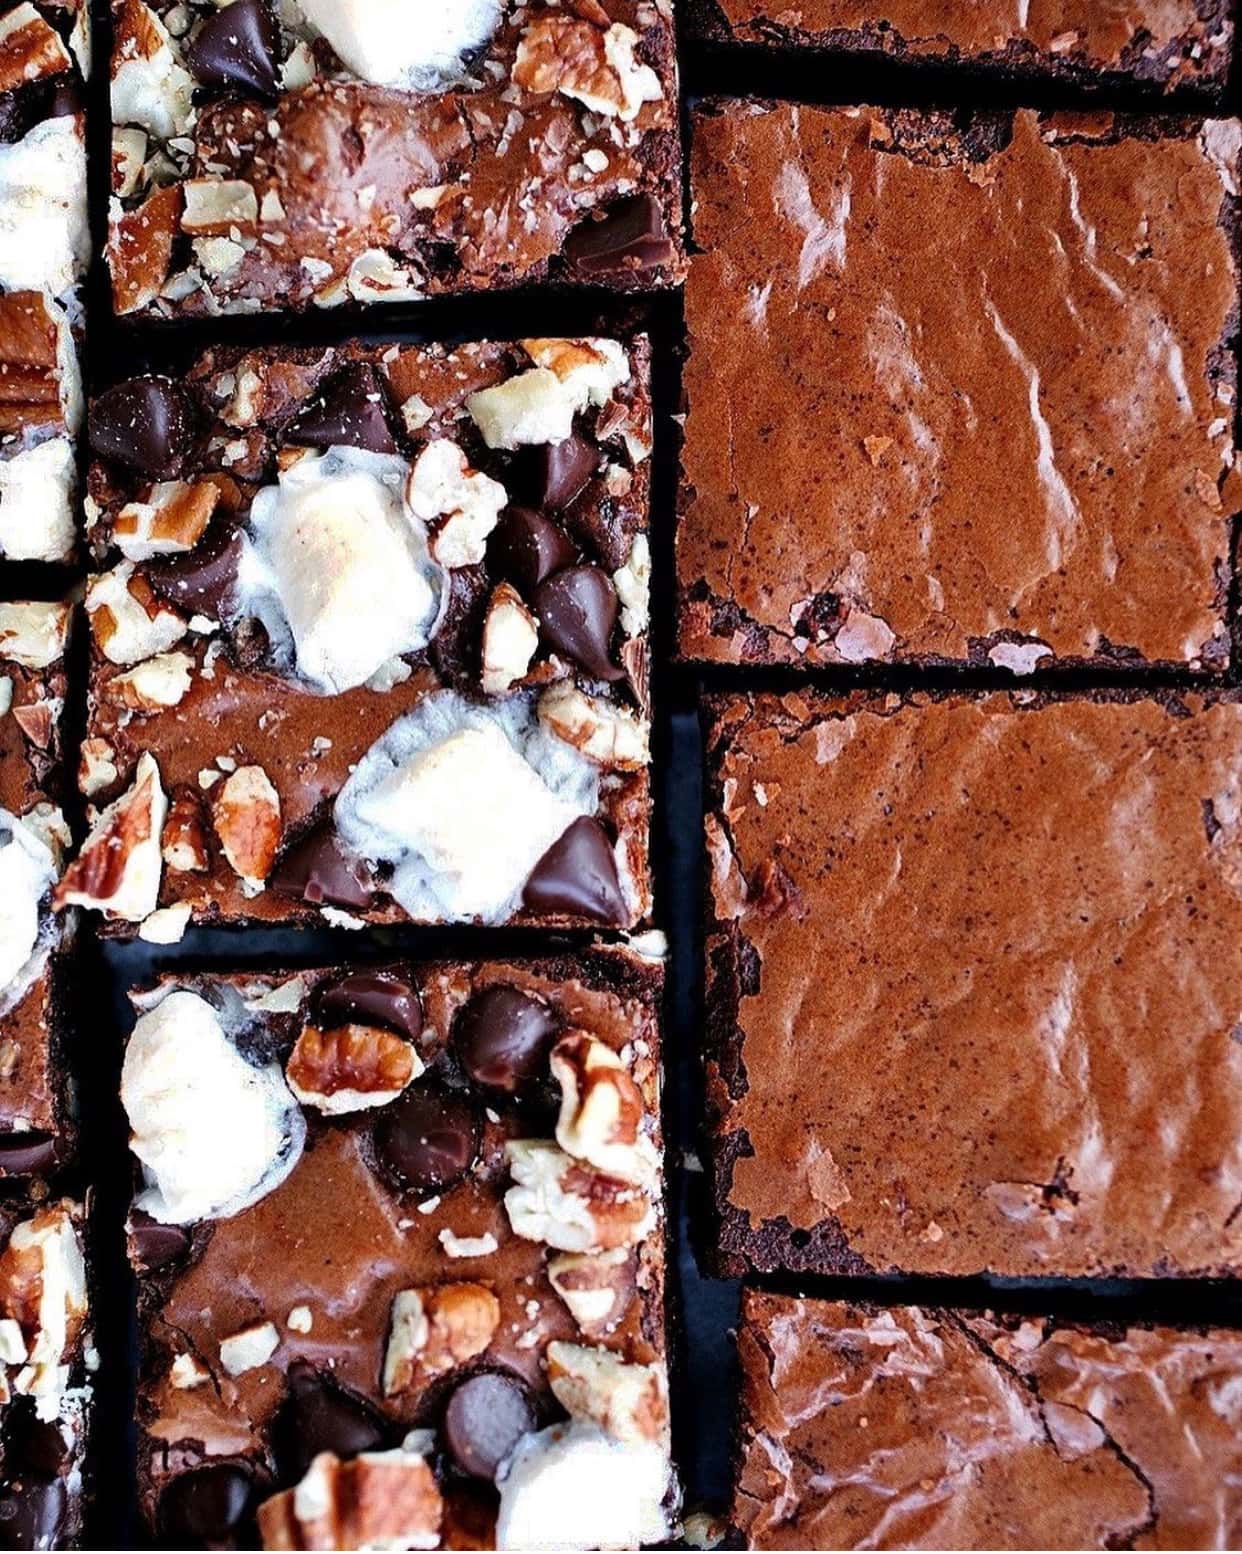 rocky road brownies close up photo